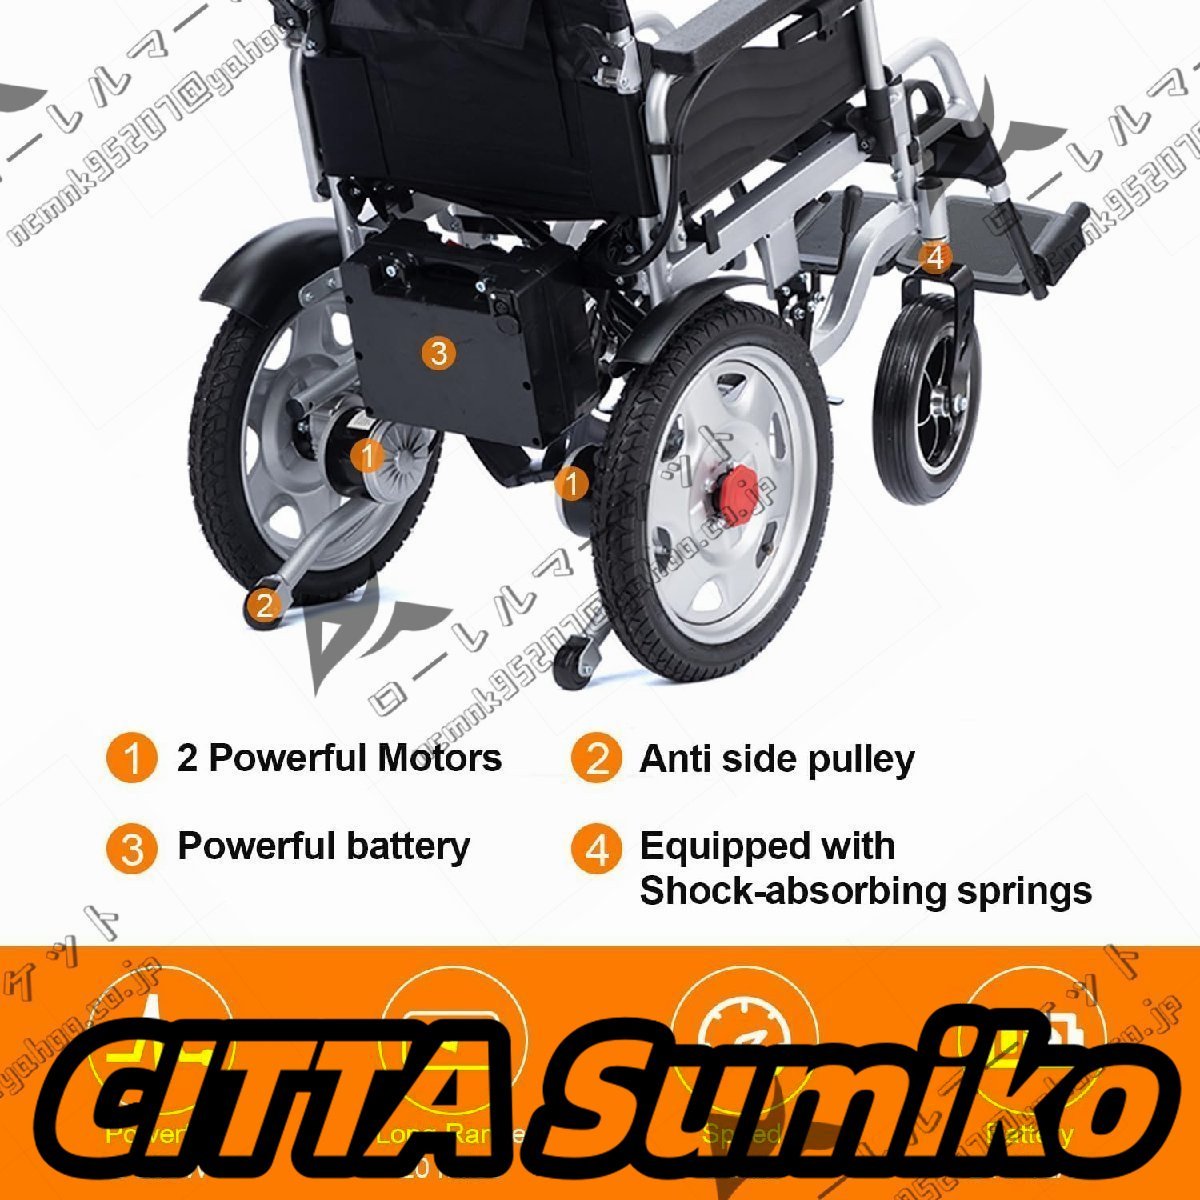  all ground shape correspondence folding type electric wheelchair sinia for portable electric wheelchair dual 500W motor for adult travel wheelchair 20 mile 330 pound 